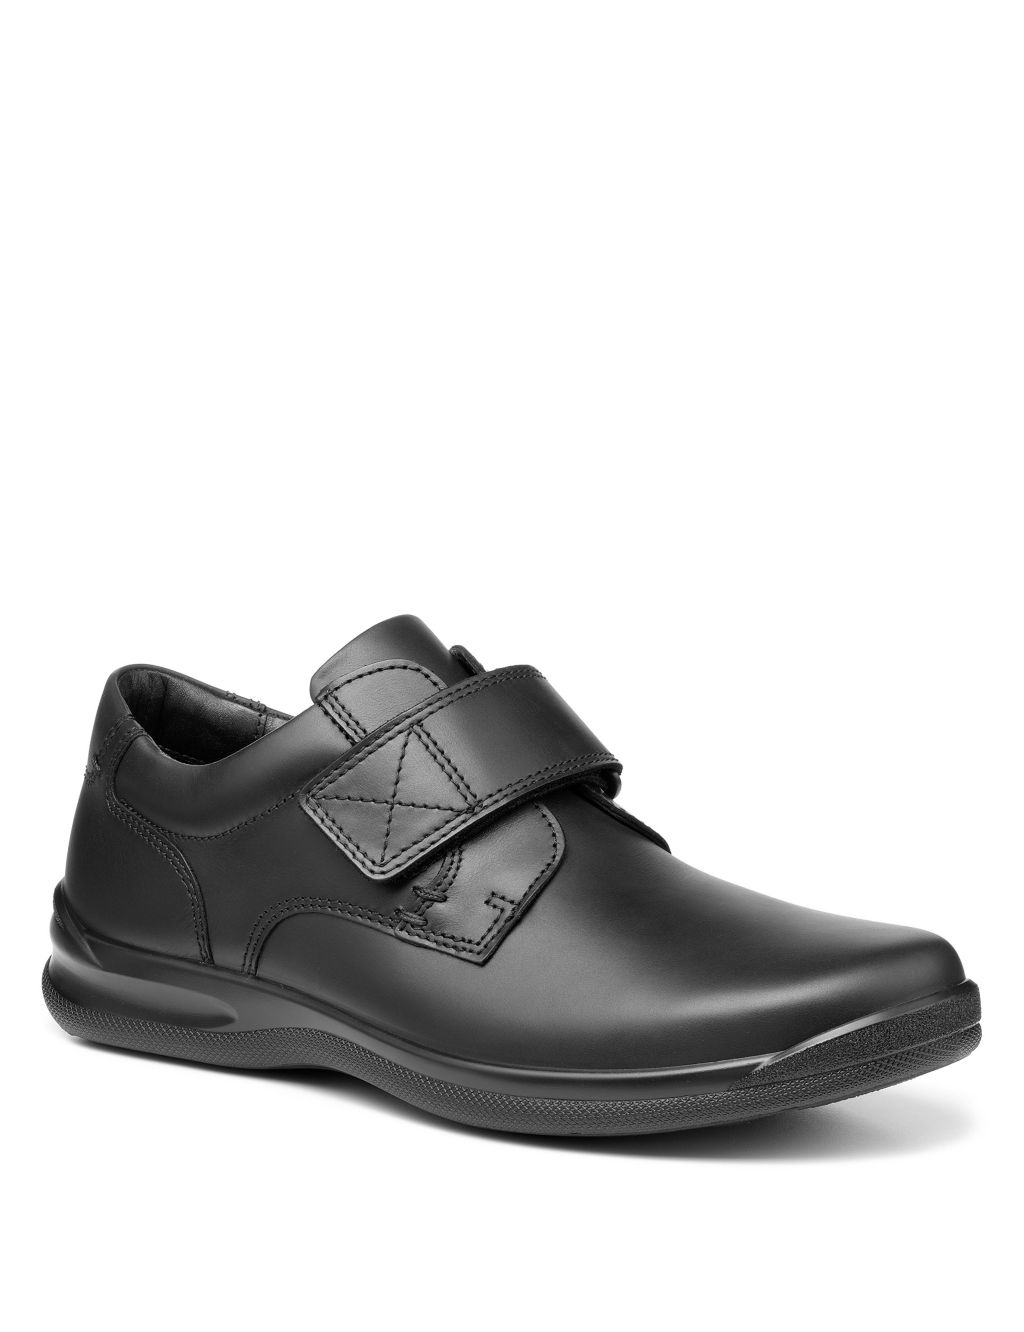 Sedgwick II Leather Derby Shoes image 2